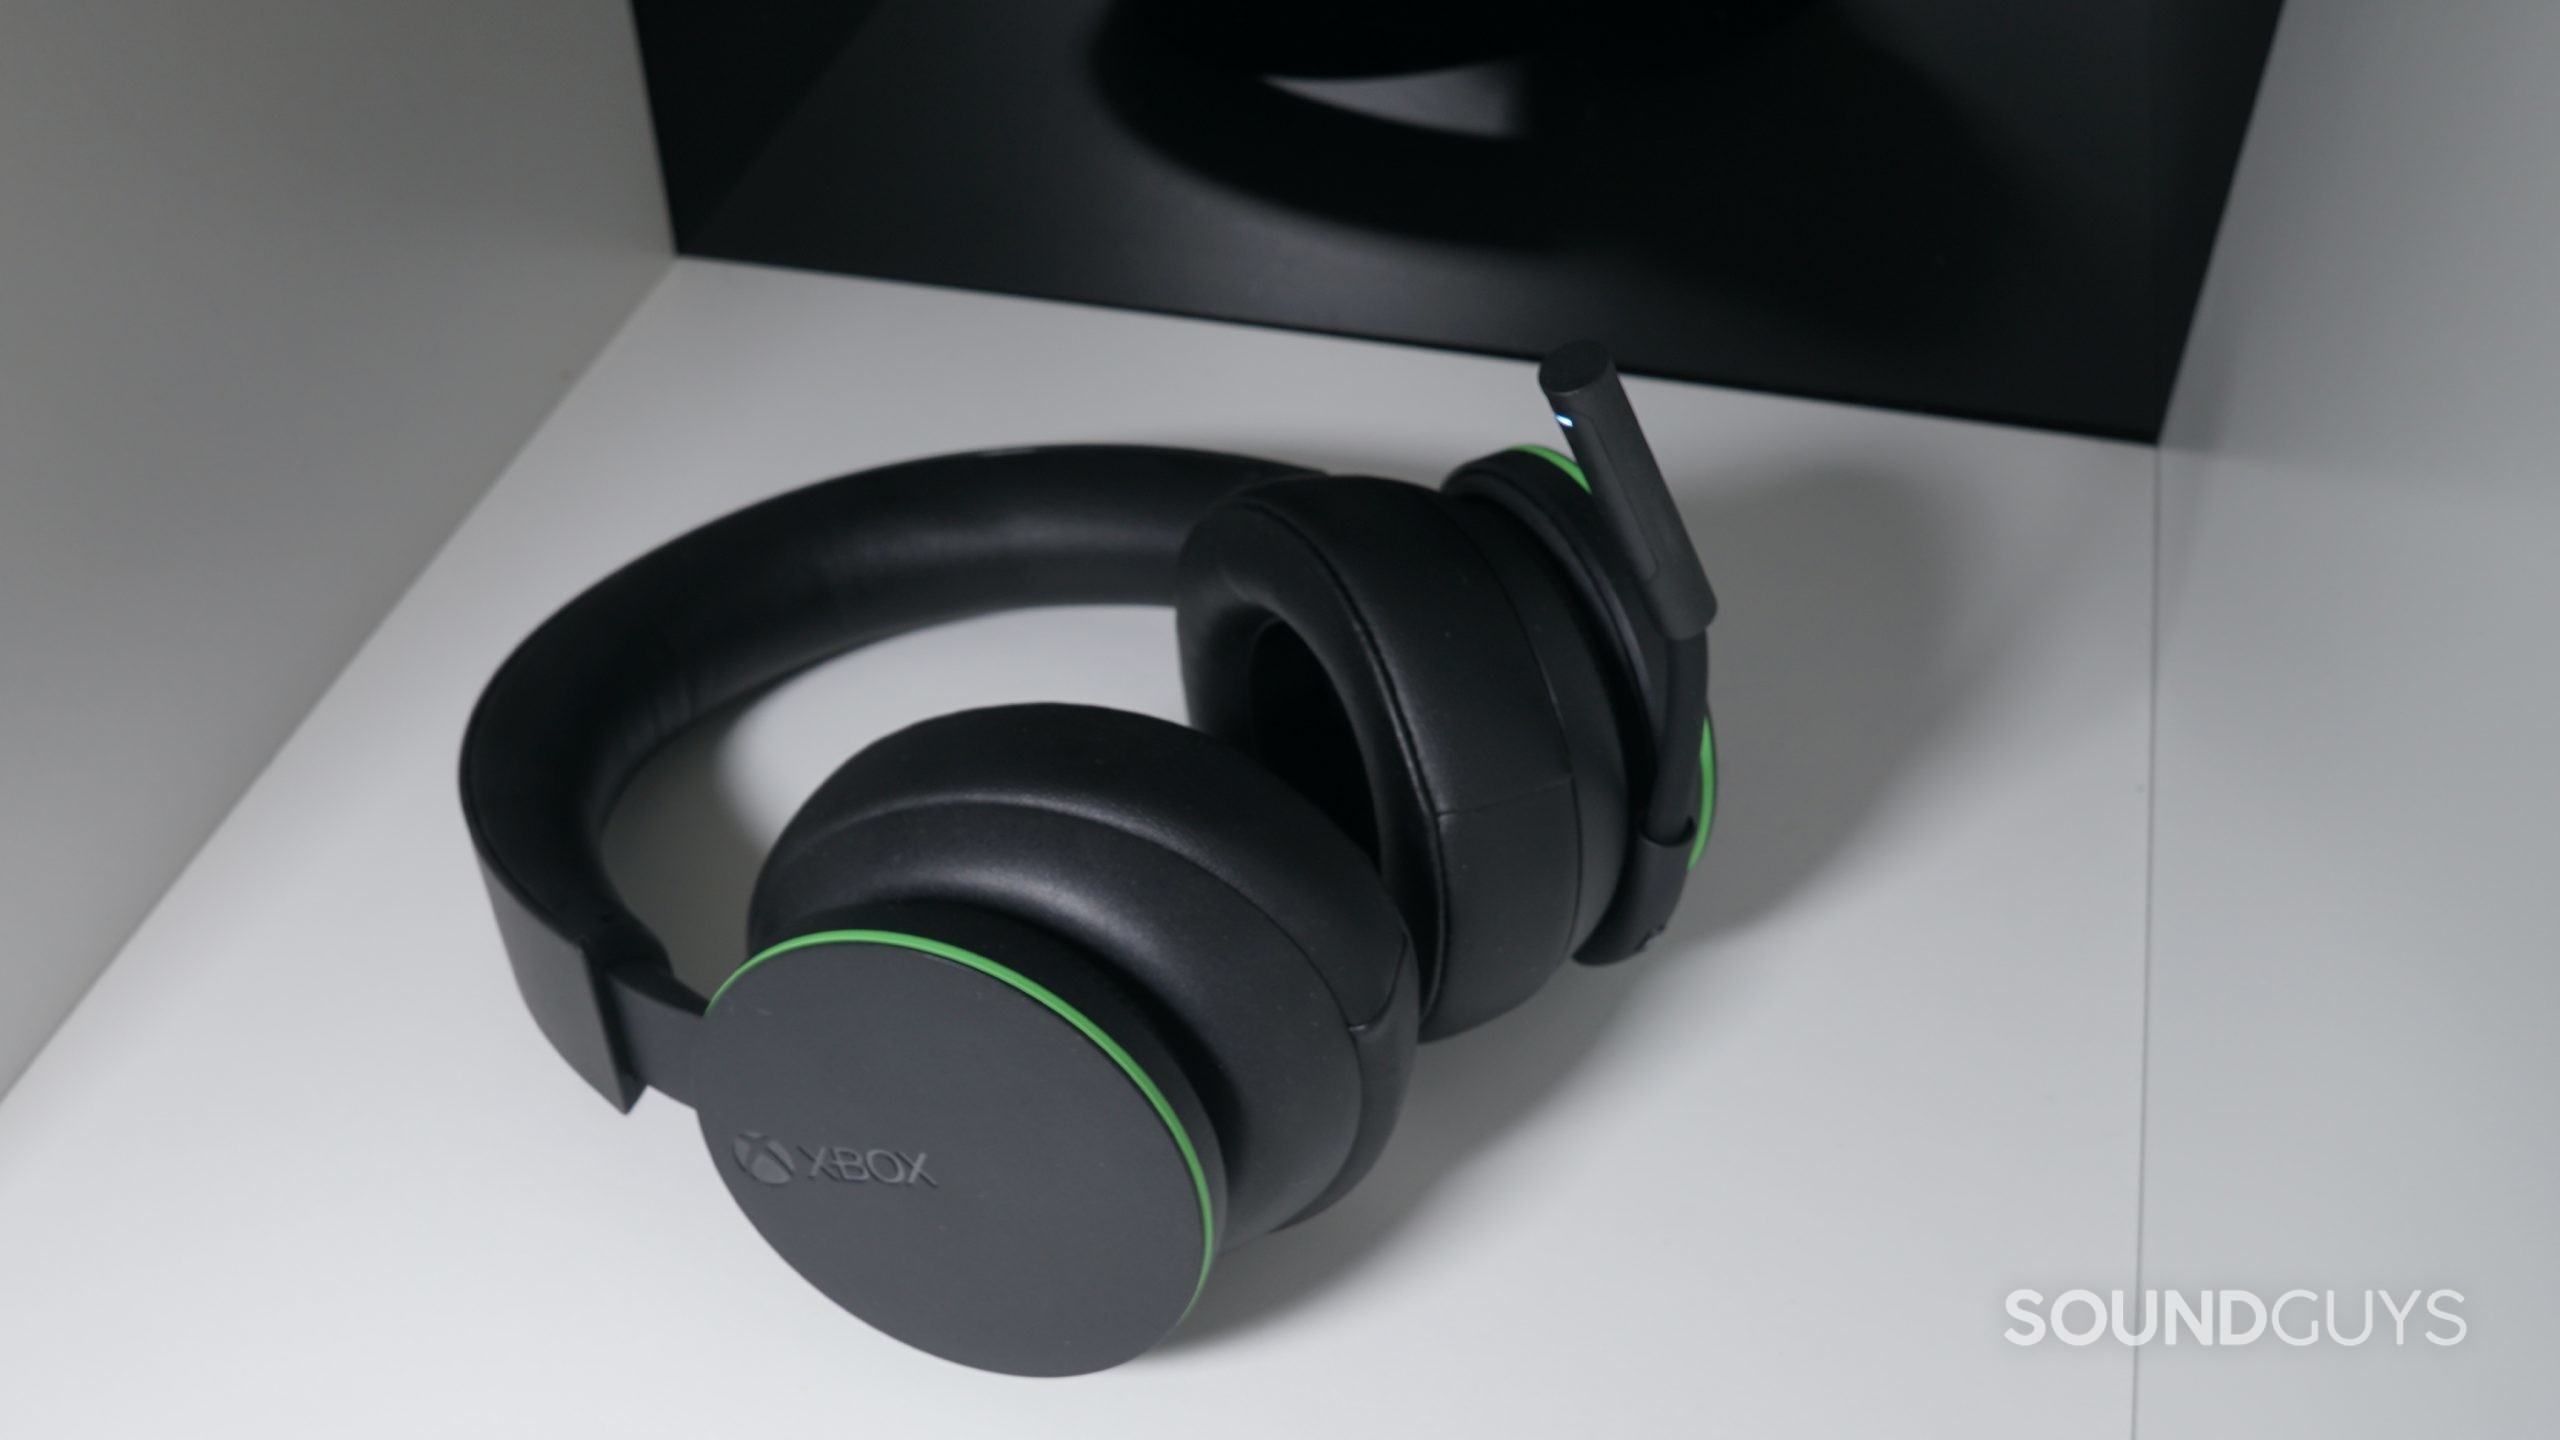 The Microsoft Xbox Wireless Headset lays on a white shelf with a reflective surface behind it.